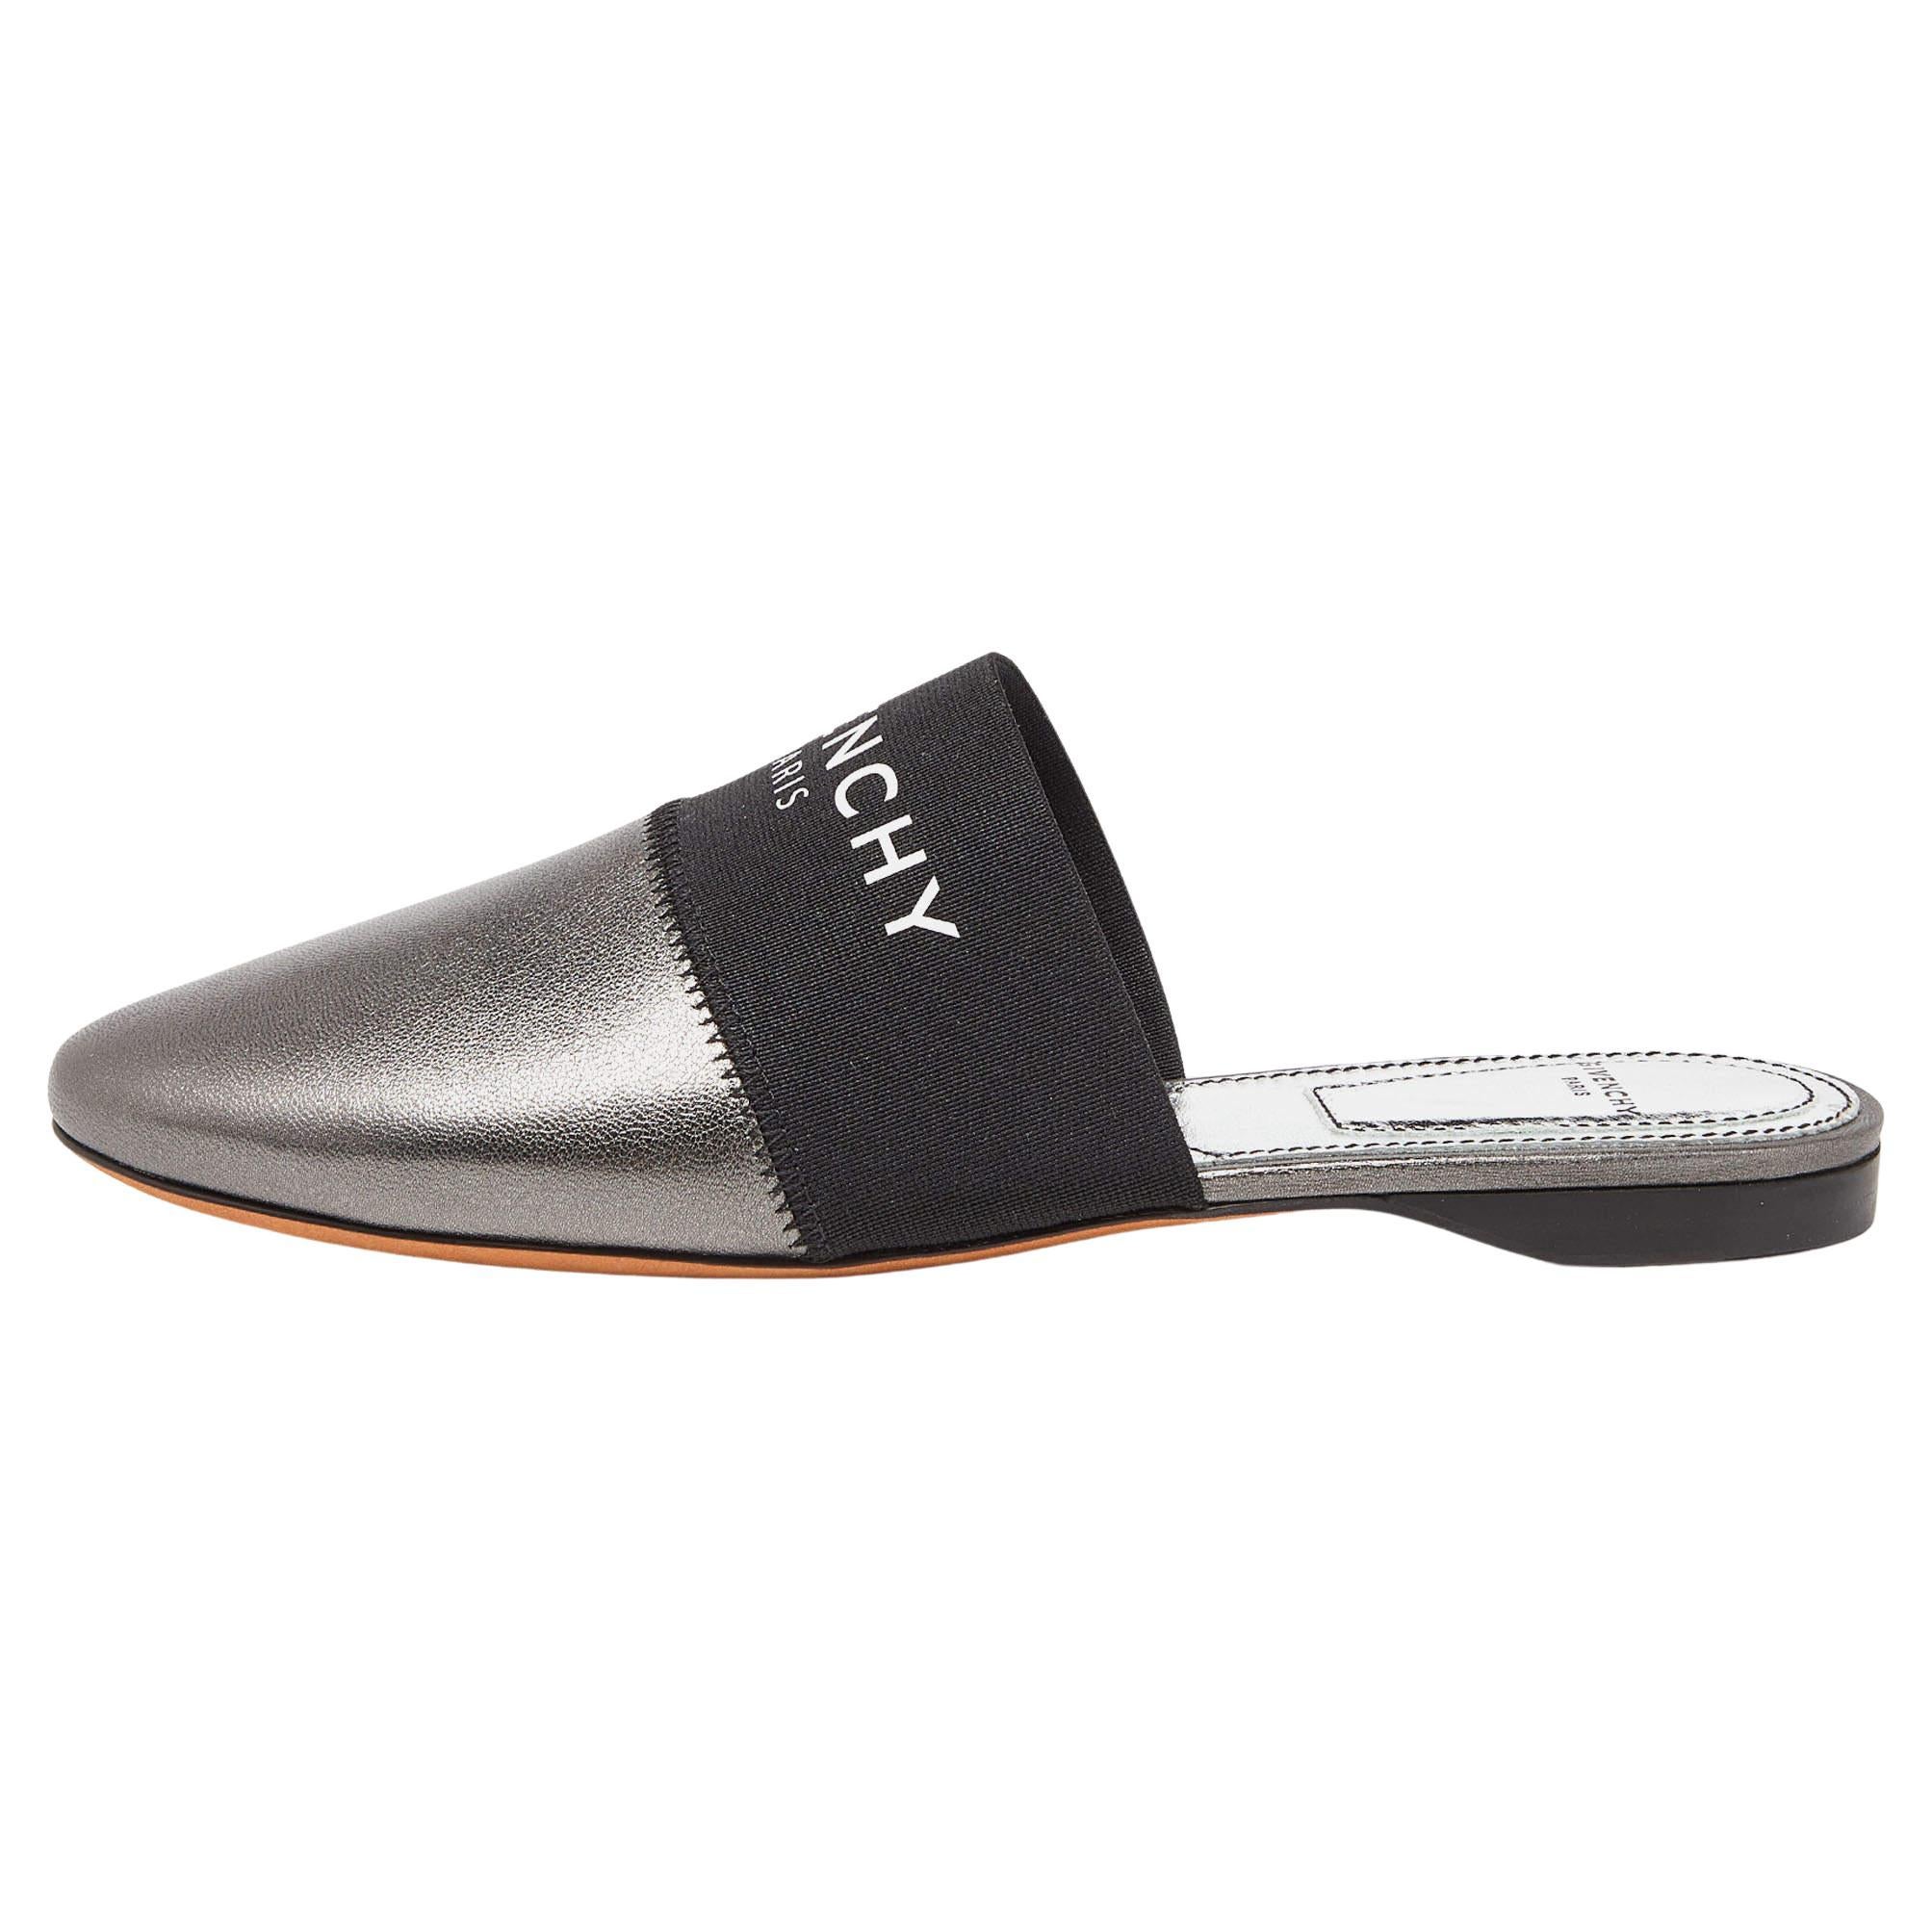 Givenchy Metallic Grey Leather Bedford Flat Mules Size 36 For Sale